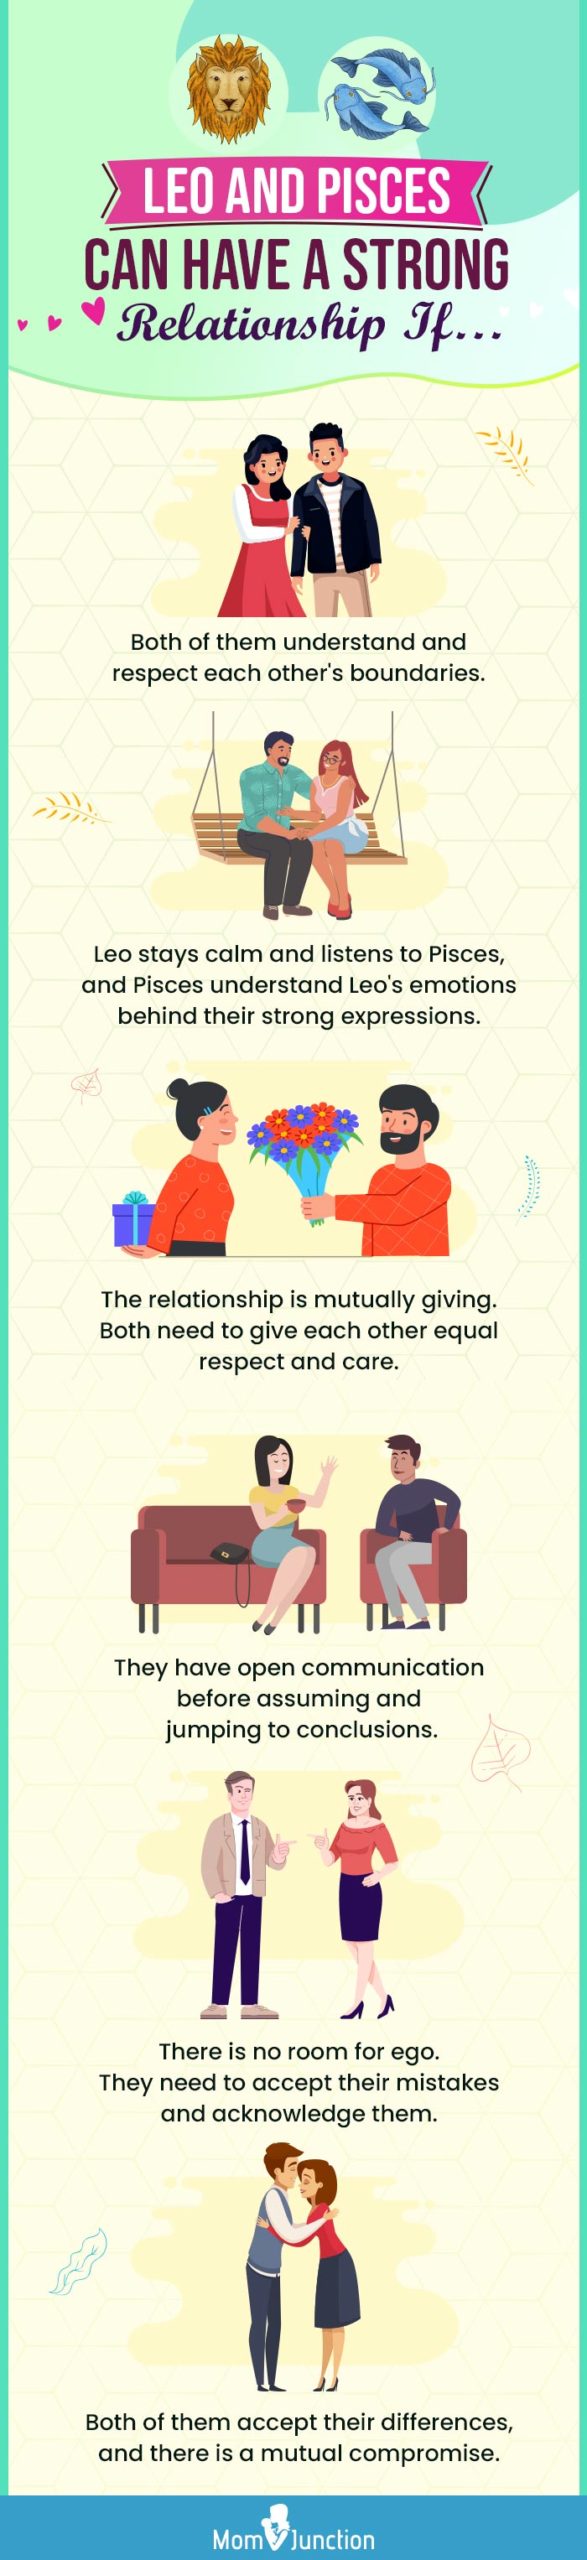 leo and pisces can have a strong relationship (infographic)